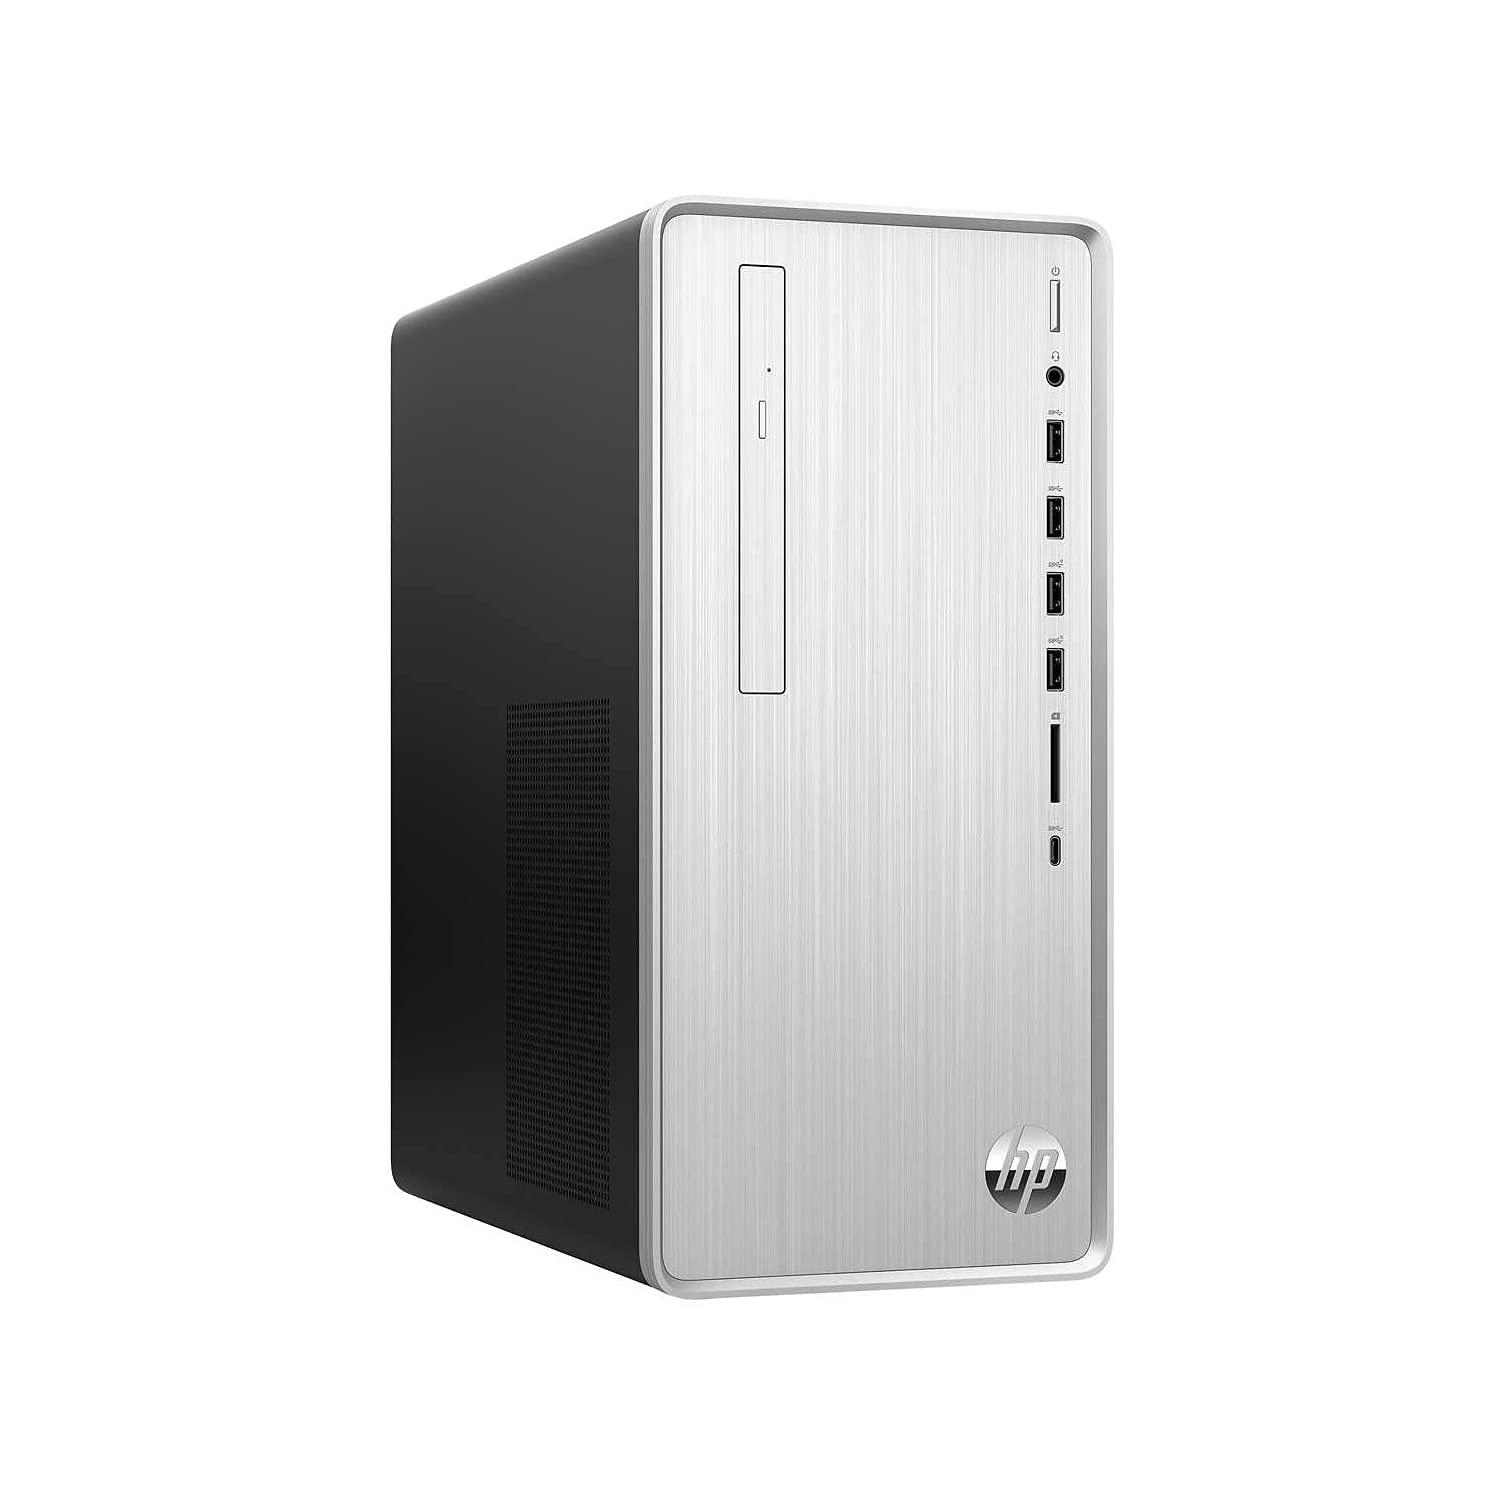 HP Pavilion Desktop Computer, AMD Ryzen 7 4700G 3.6GHz, 16 GB RAM, 512 GB SSD , Windows 10 Home, Dual Display Support, Wireless Computer PC, for Gaming, Study, and Business